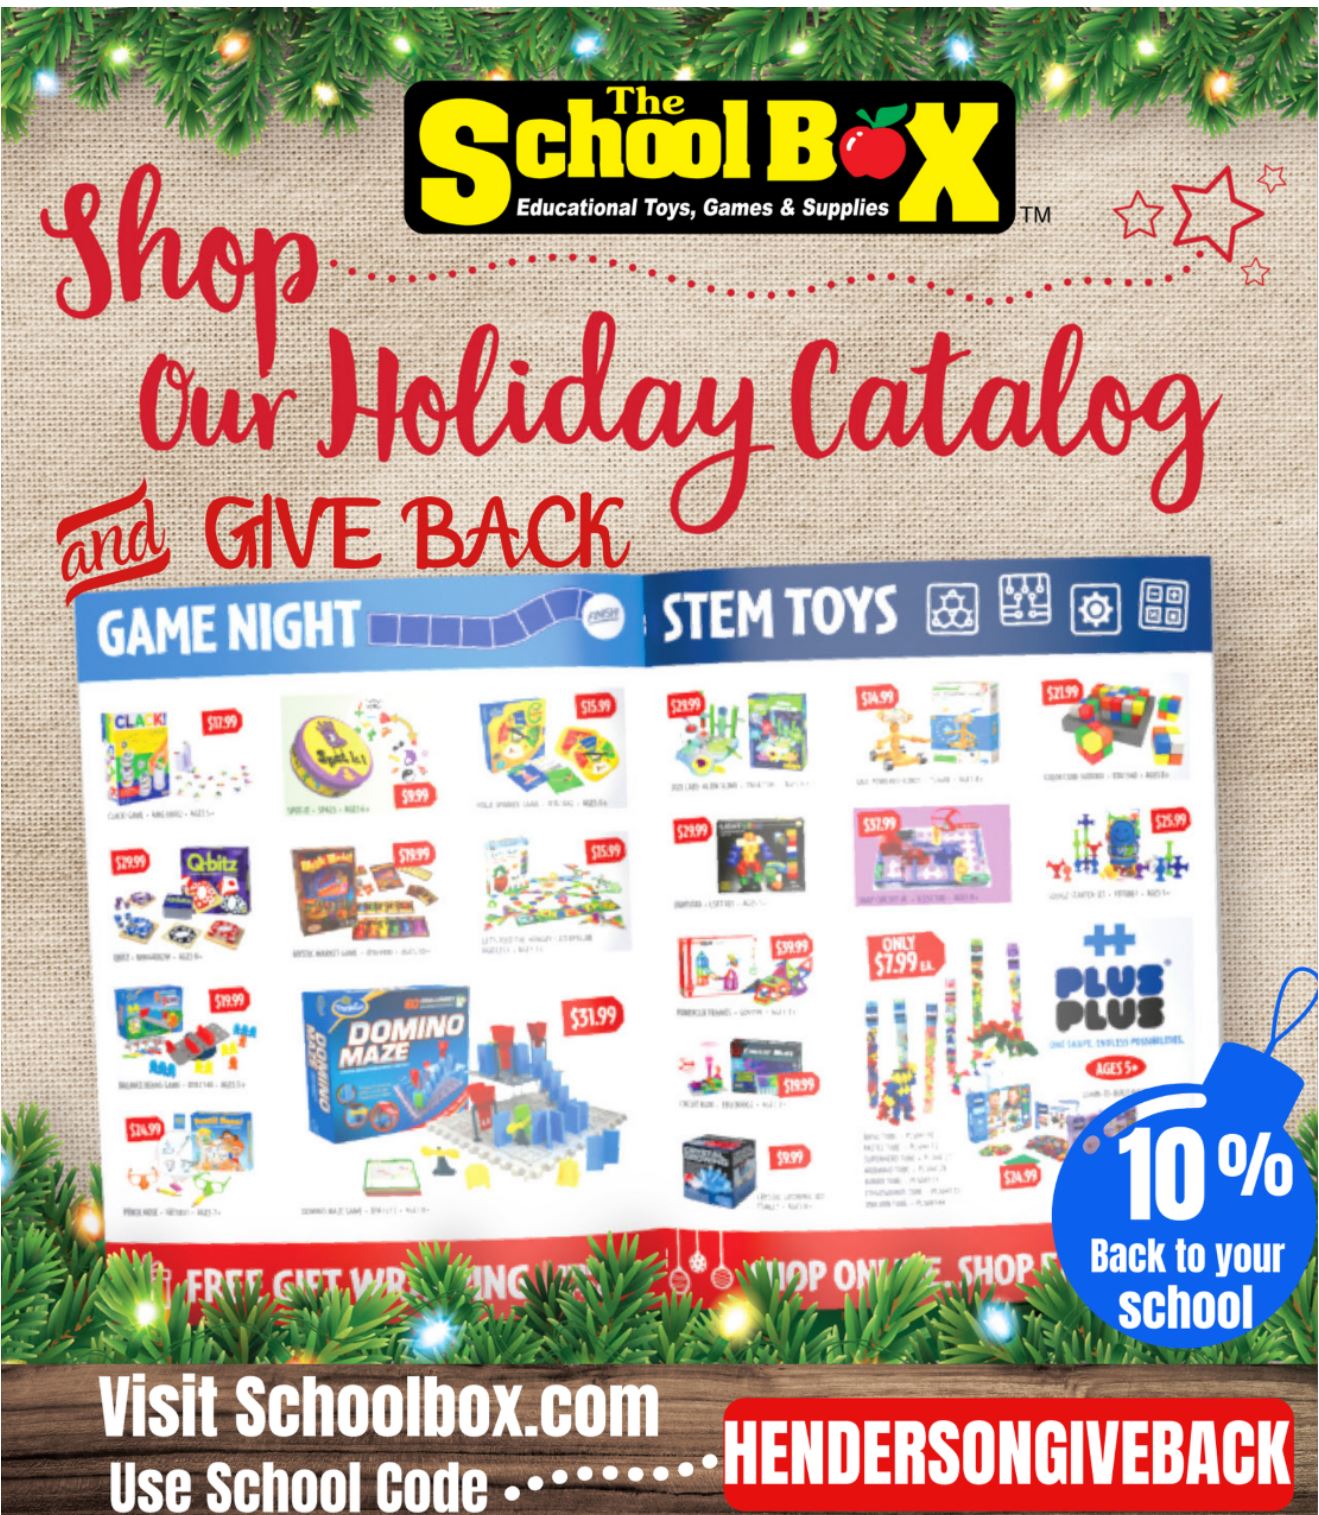 The School Box Giveaway